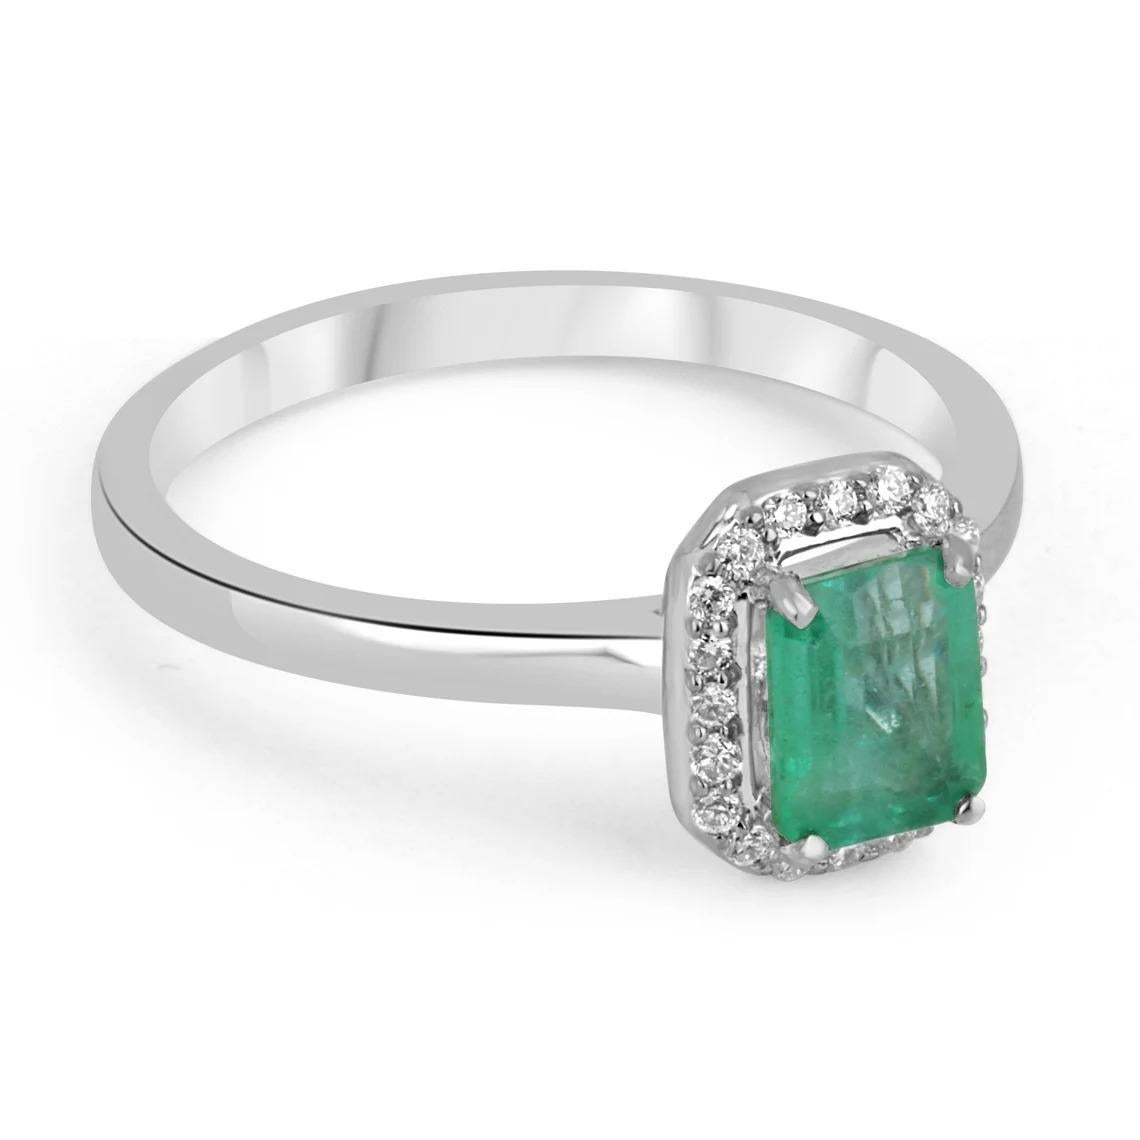 A simple, yet so beautiful emerald and diamond engagement/right-hand ring. The center stone features a stunning 1.09-carat, natural Zambian emerald with a medium bluish-green color and good eye clarity. Surrounding the center gem are various petite